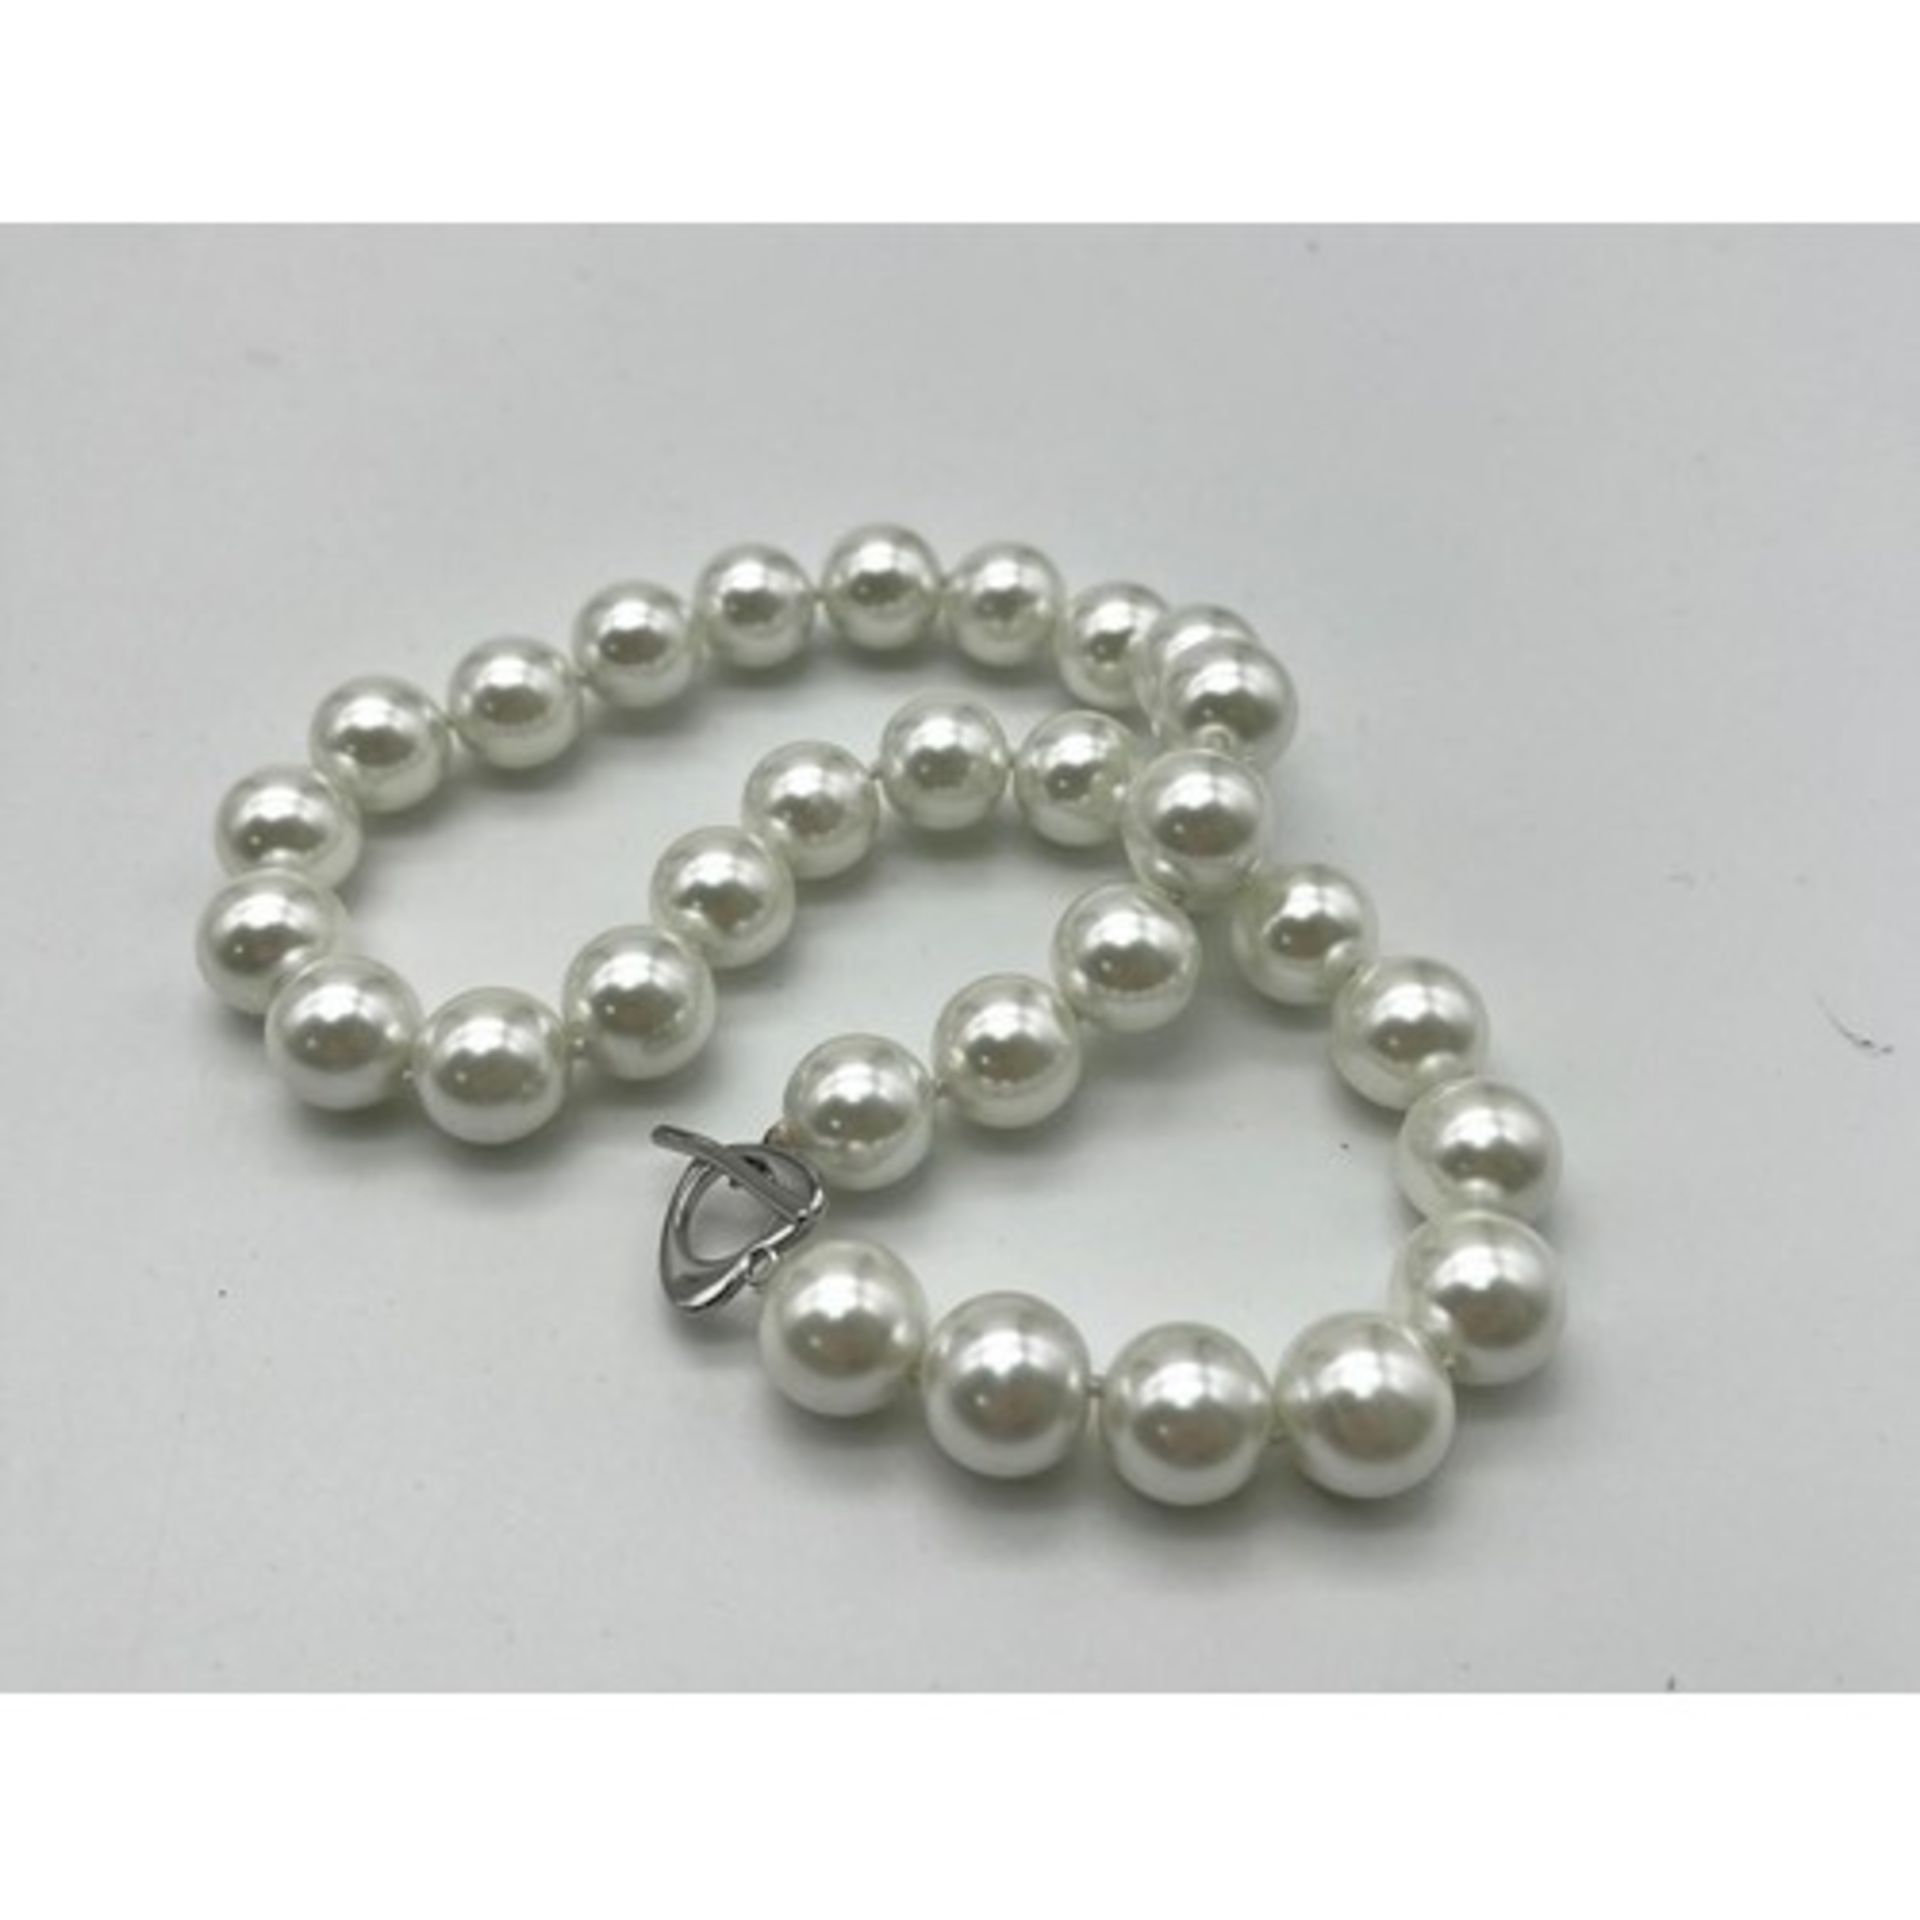 A White South Sea Pearl Shell Bead Necklace. 14mm beads. 44cm necklace length. Heart clasp. - Bild 3 aus 3